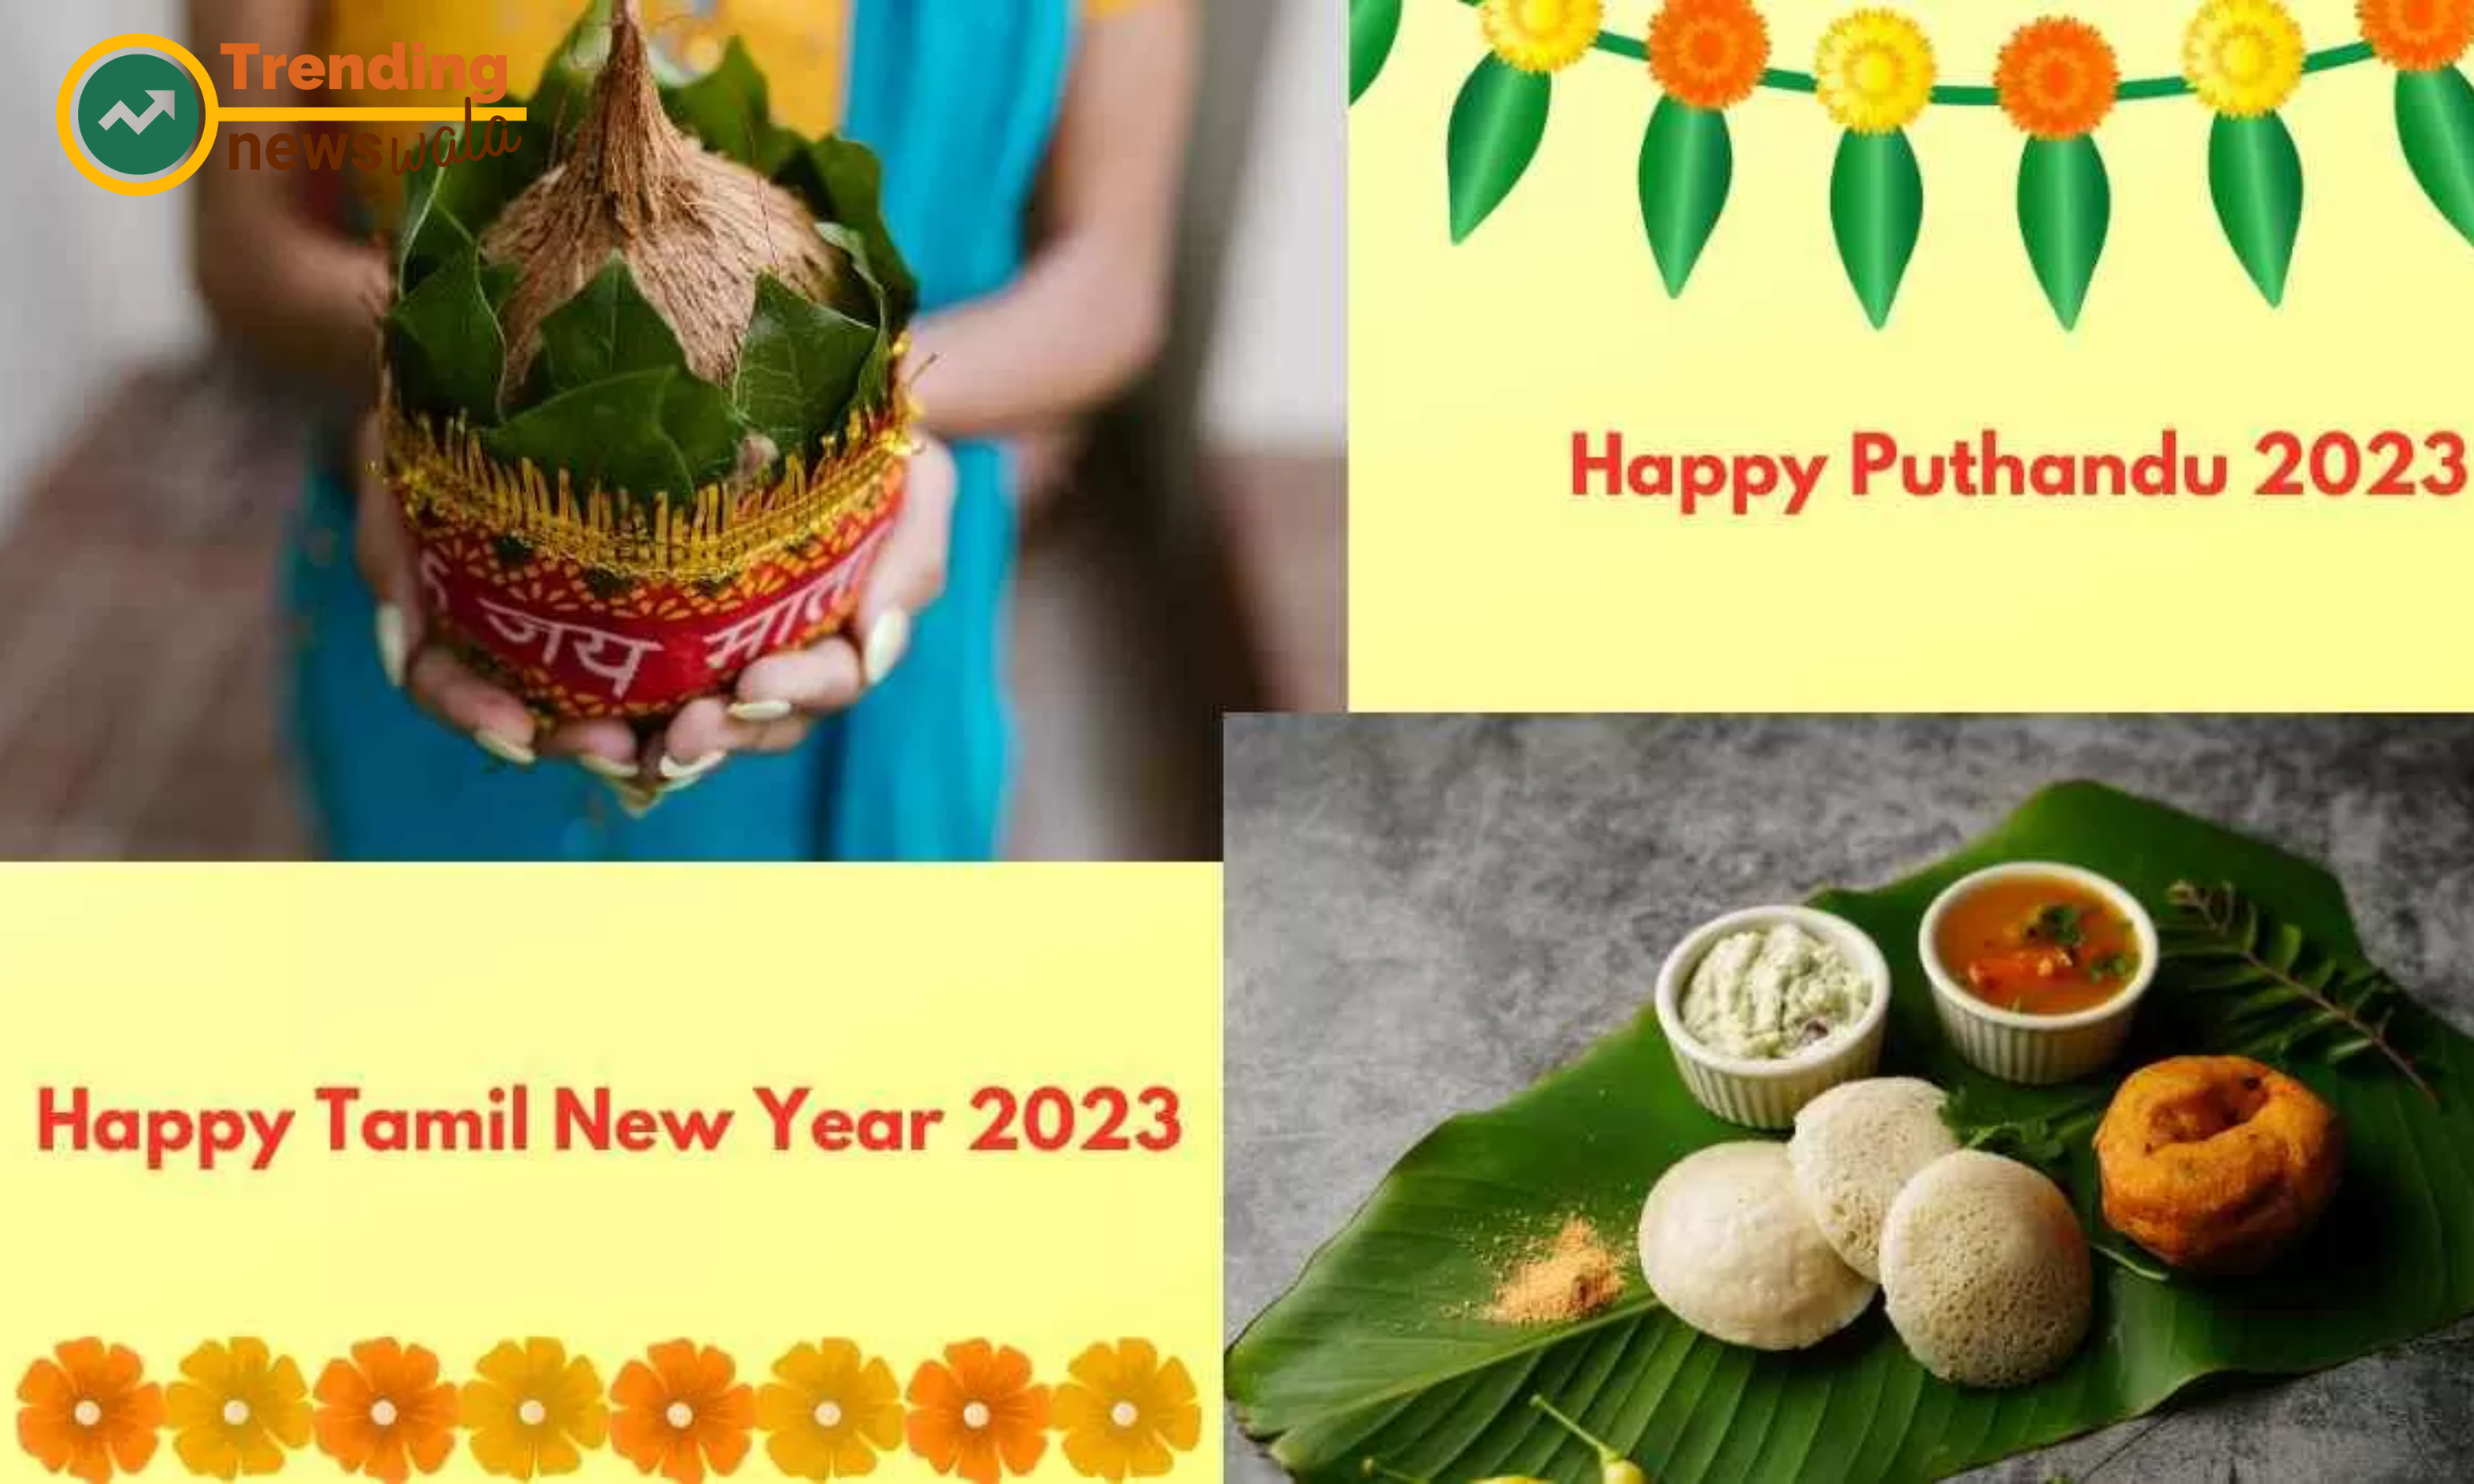 Tamil New Year traditions and customs betel leaves, areca nuts, gold or silver jewelry, coins, flowers, and a mirror. 